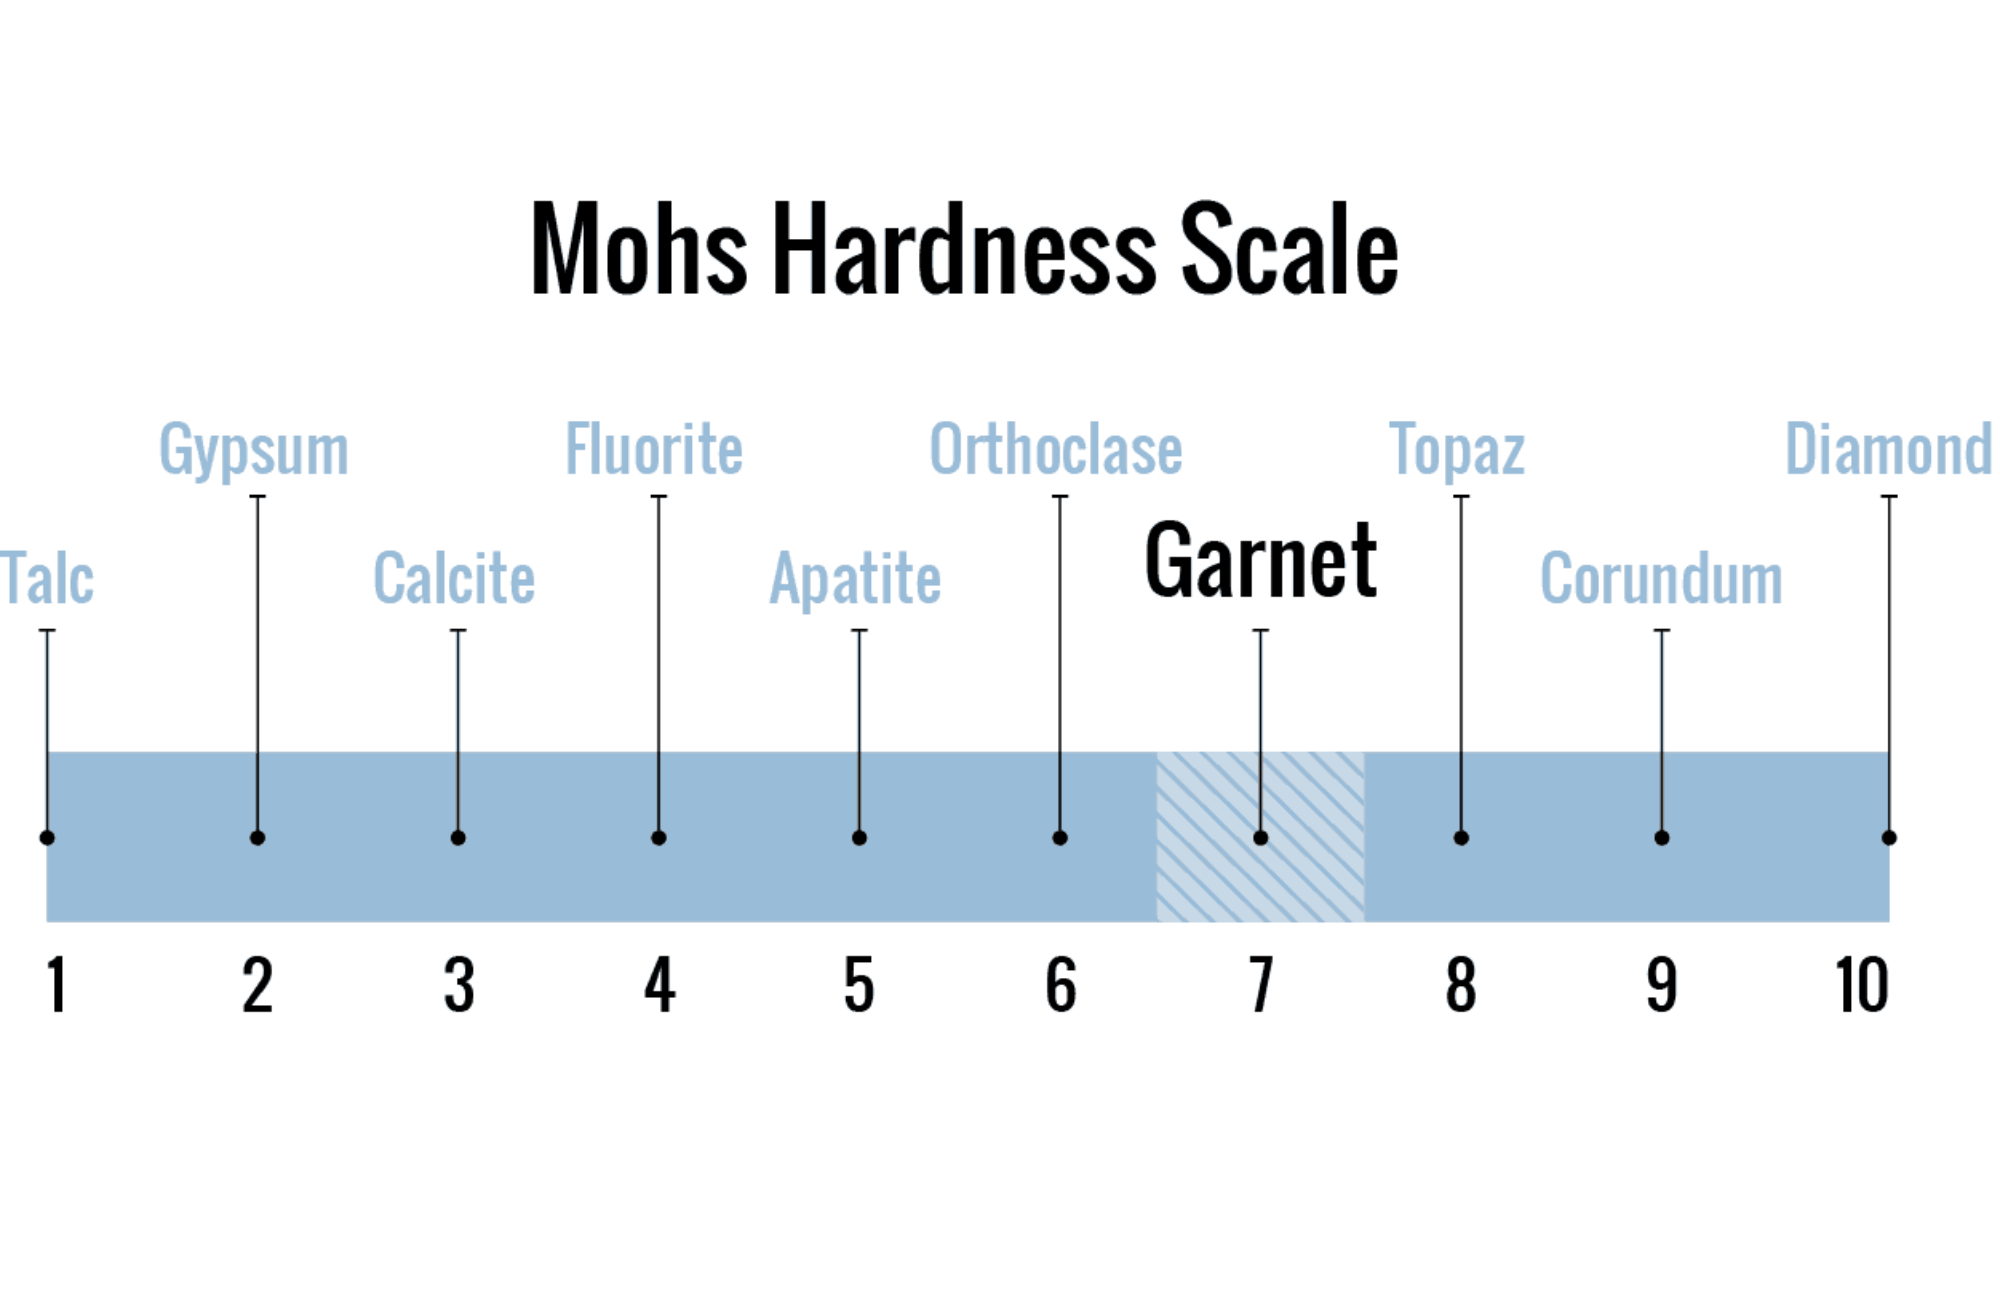 Garnet's hardness stand out among the other stones